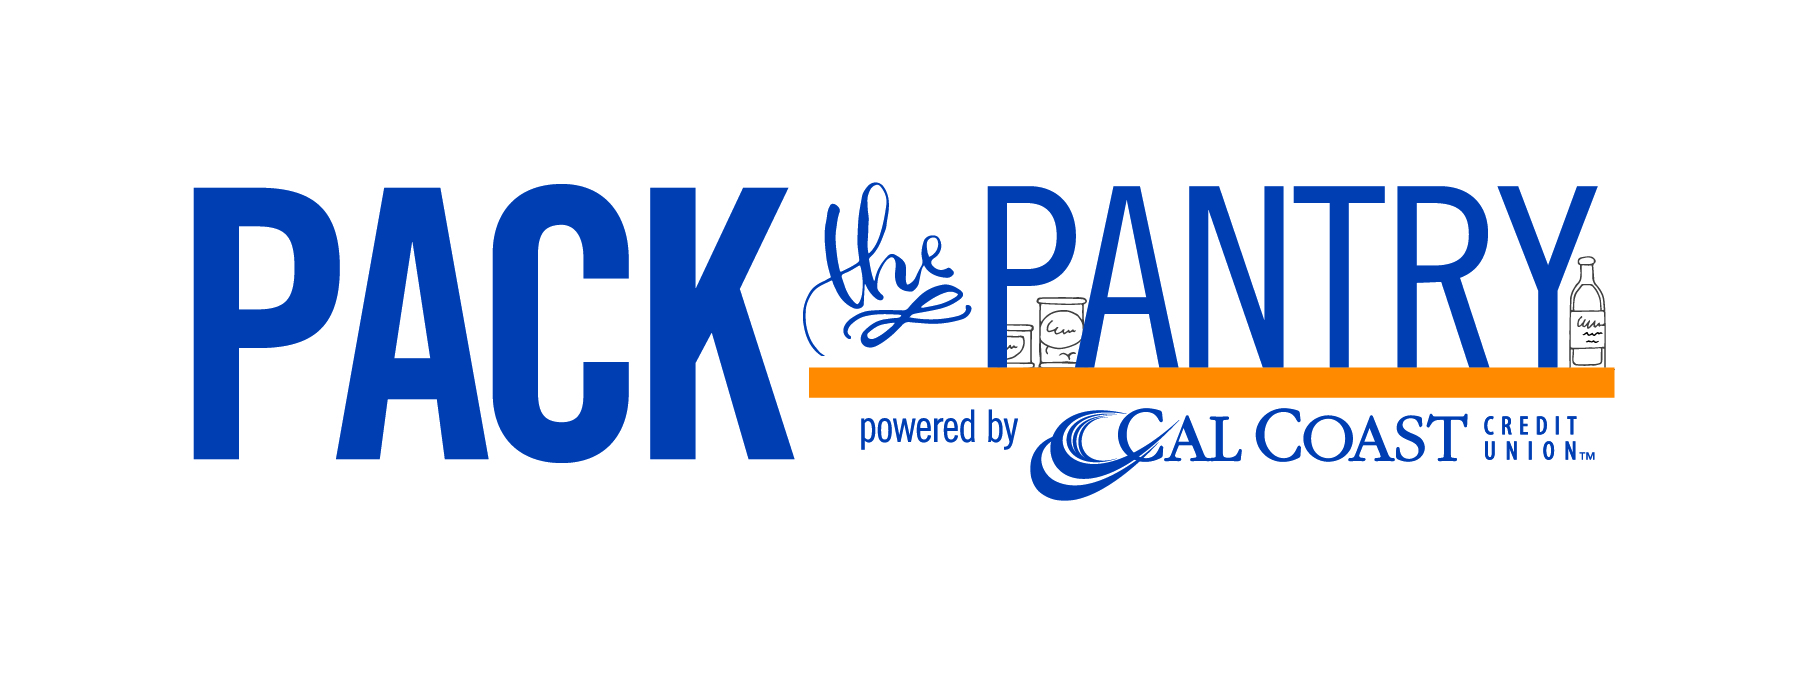 Pack the Pantry Virtual Food Drive Launched to Fill Local College Food Pantries